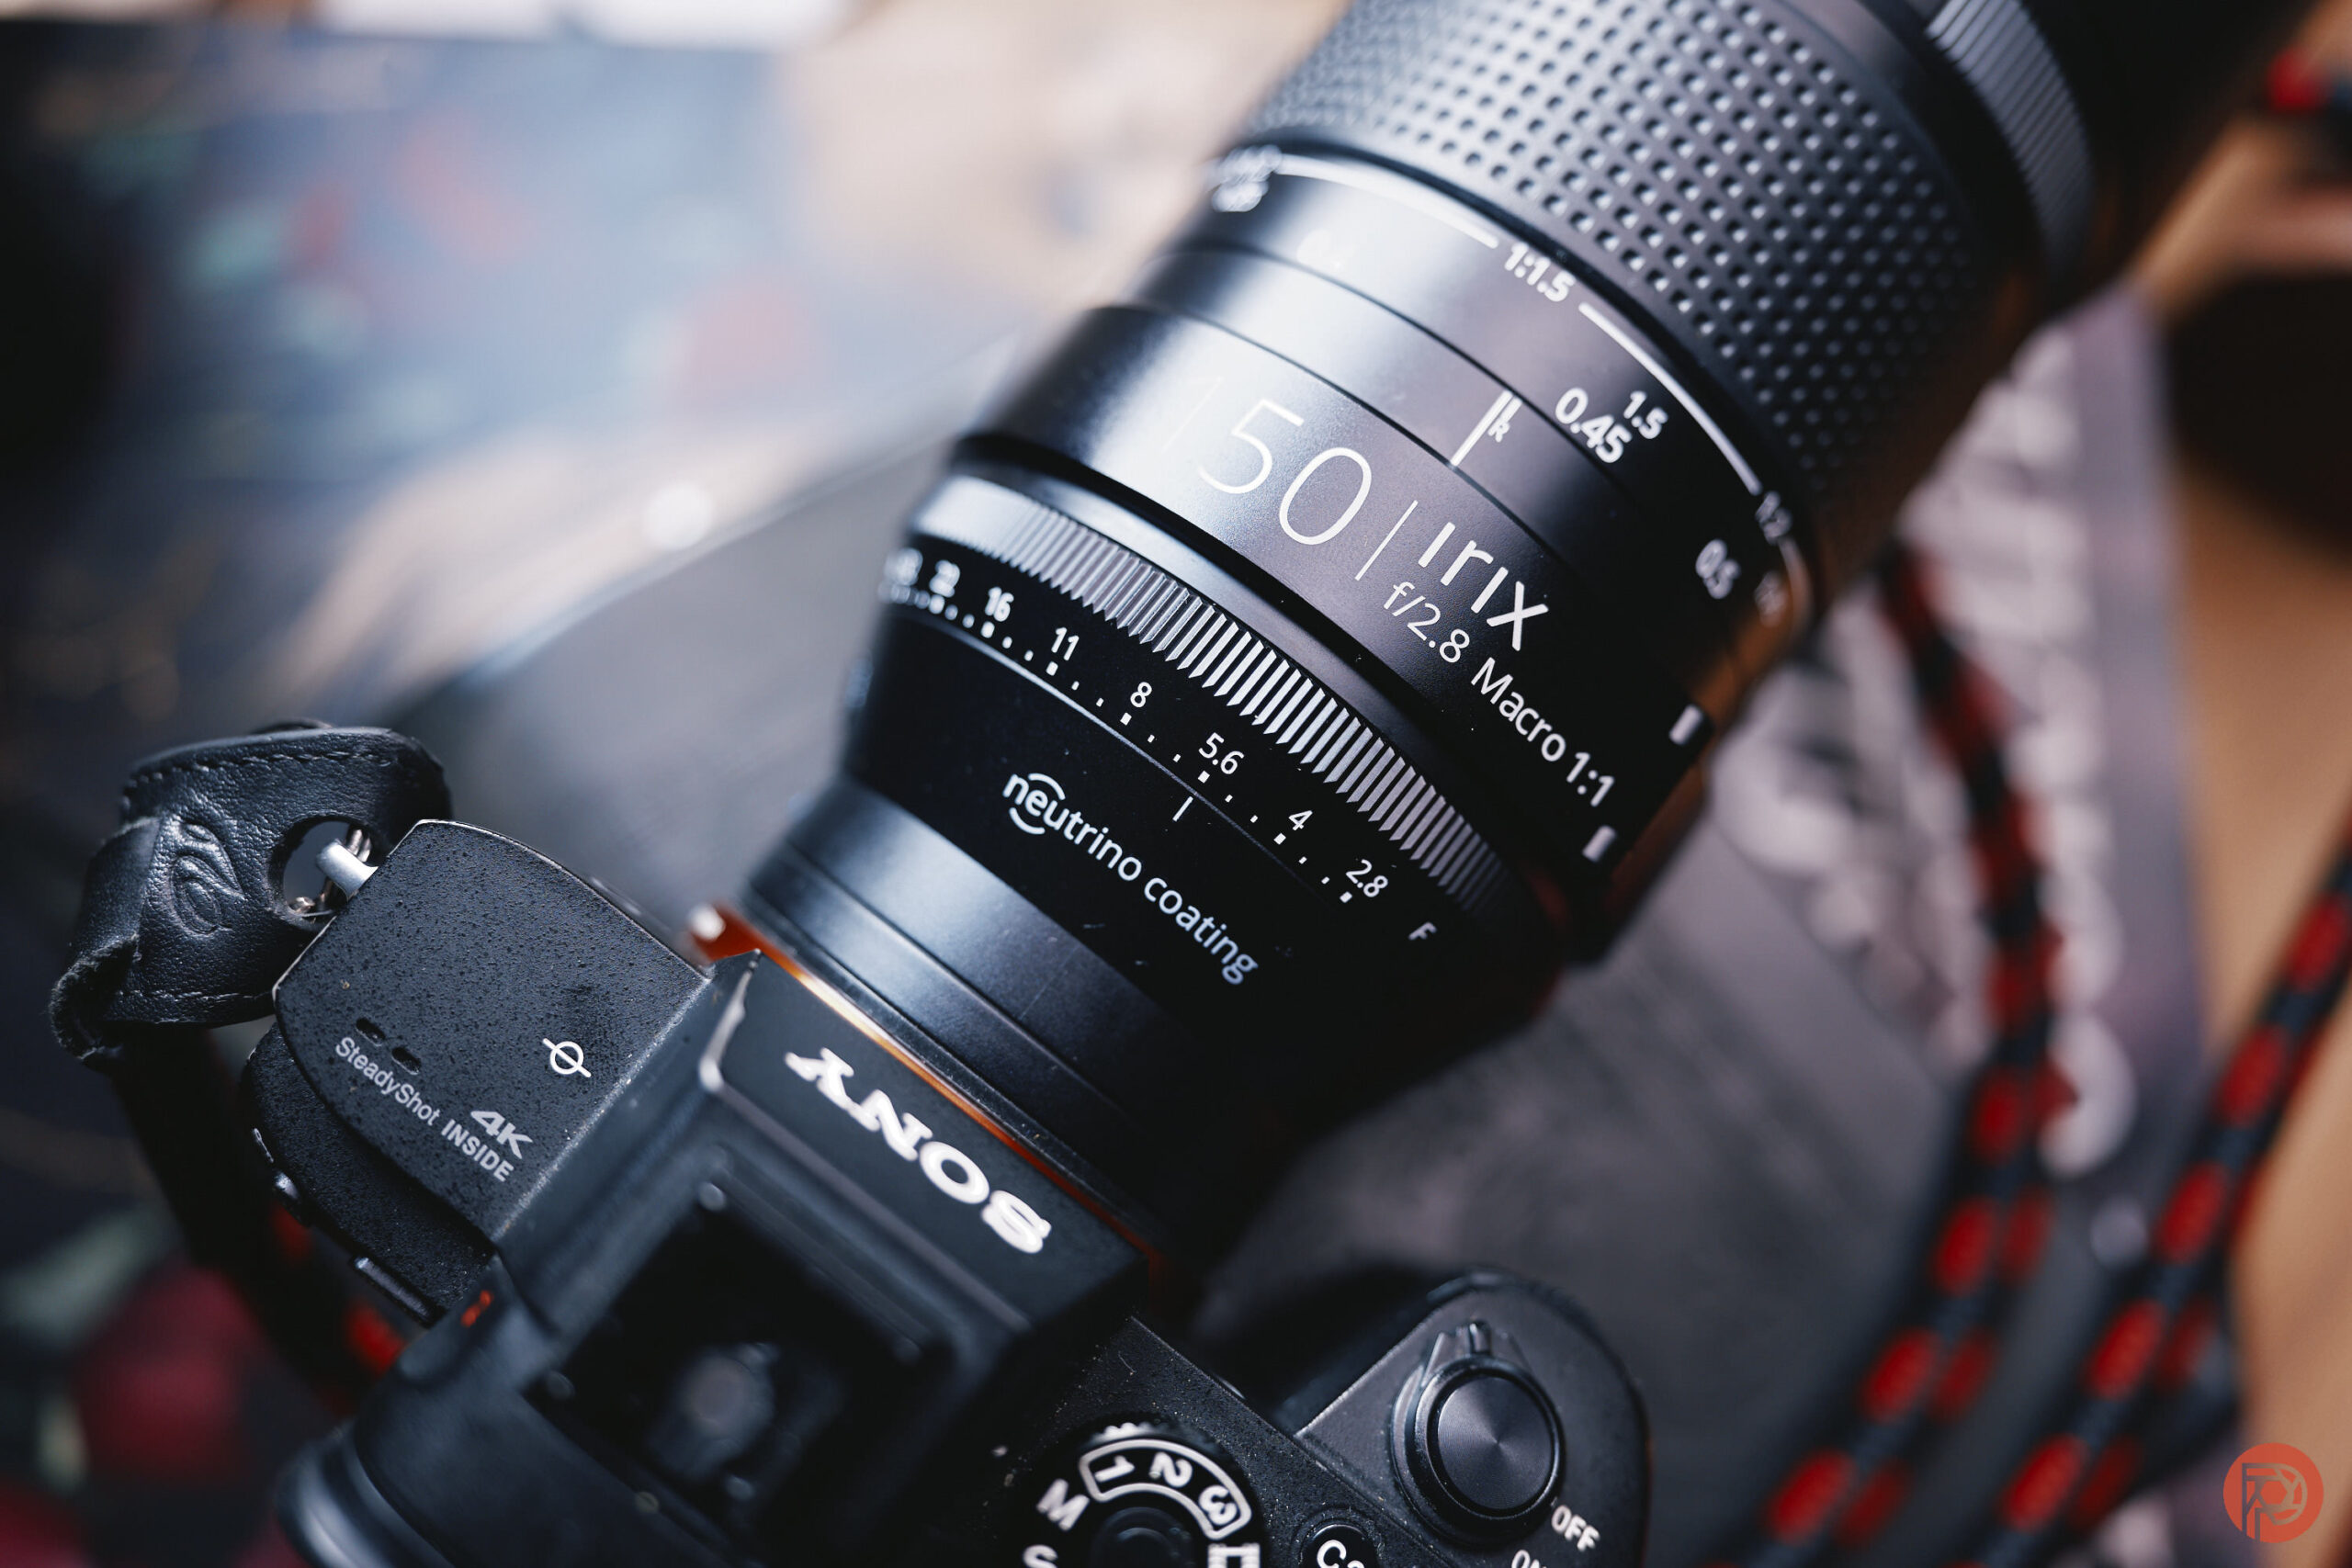 Chris-Gampat-The-Phoblographer-Irix-150mm-f2.8-for-Sony-FE-product-images-21-320s400-3